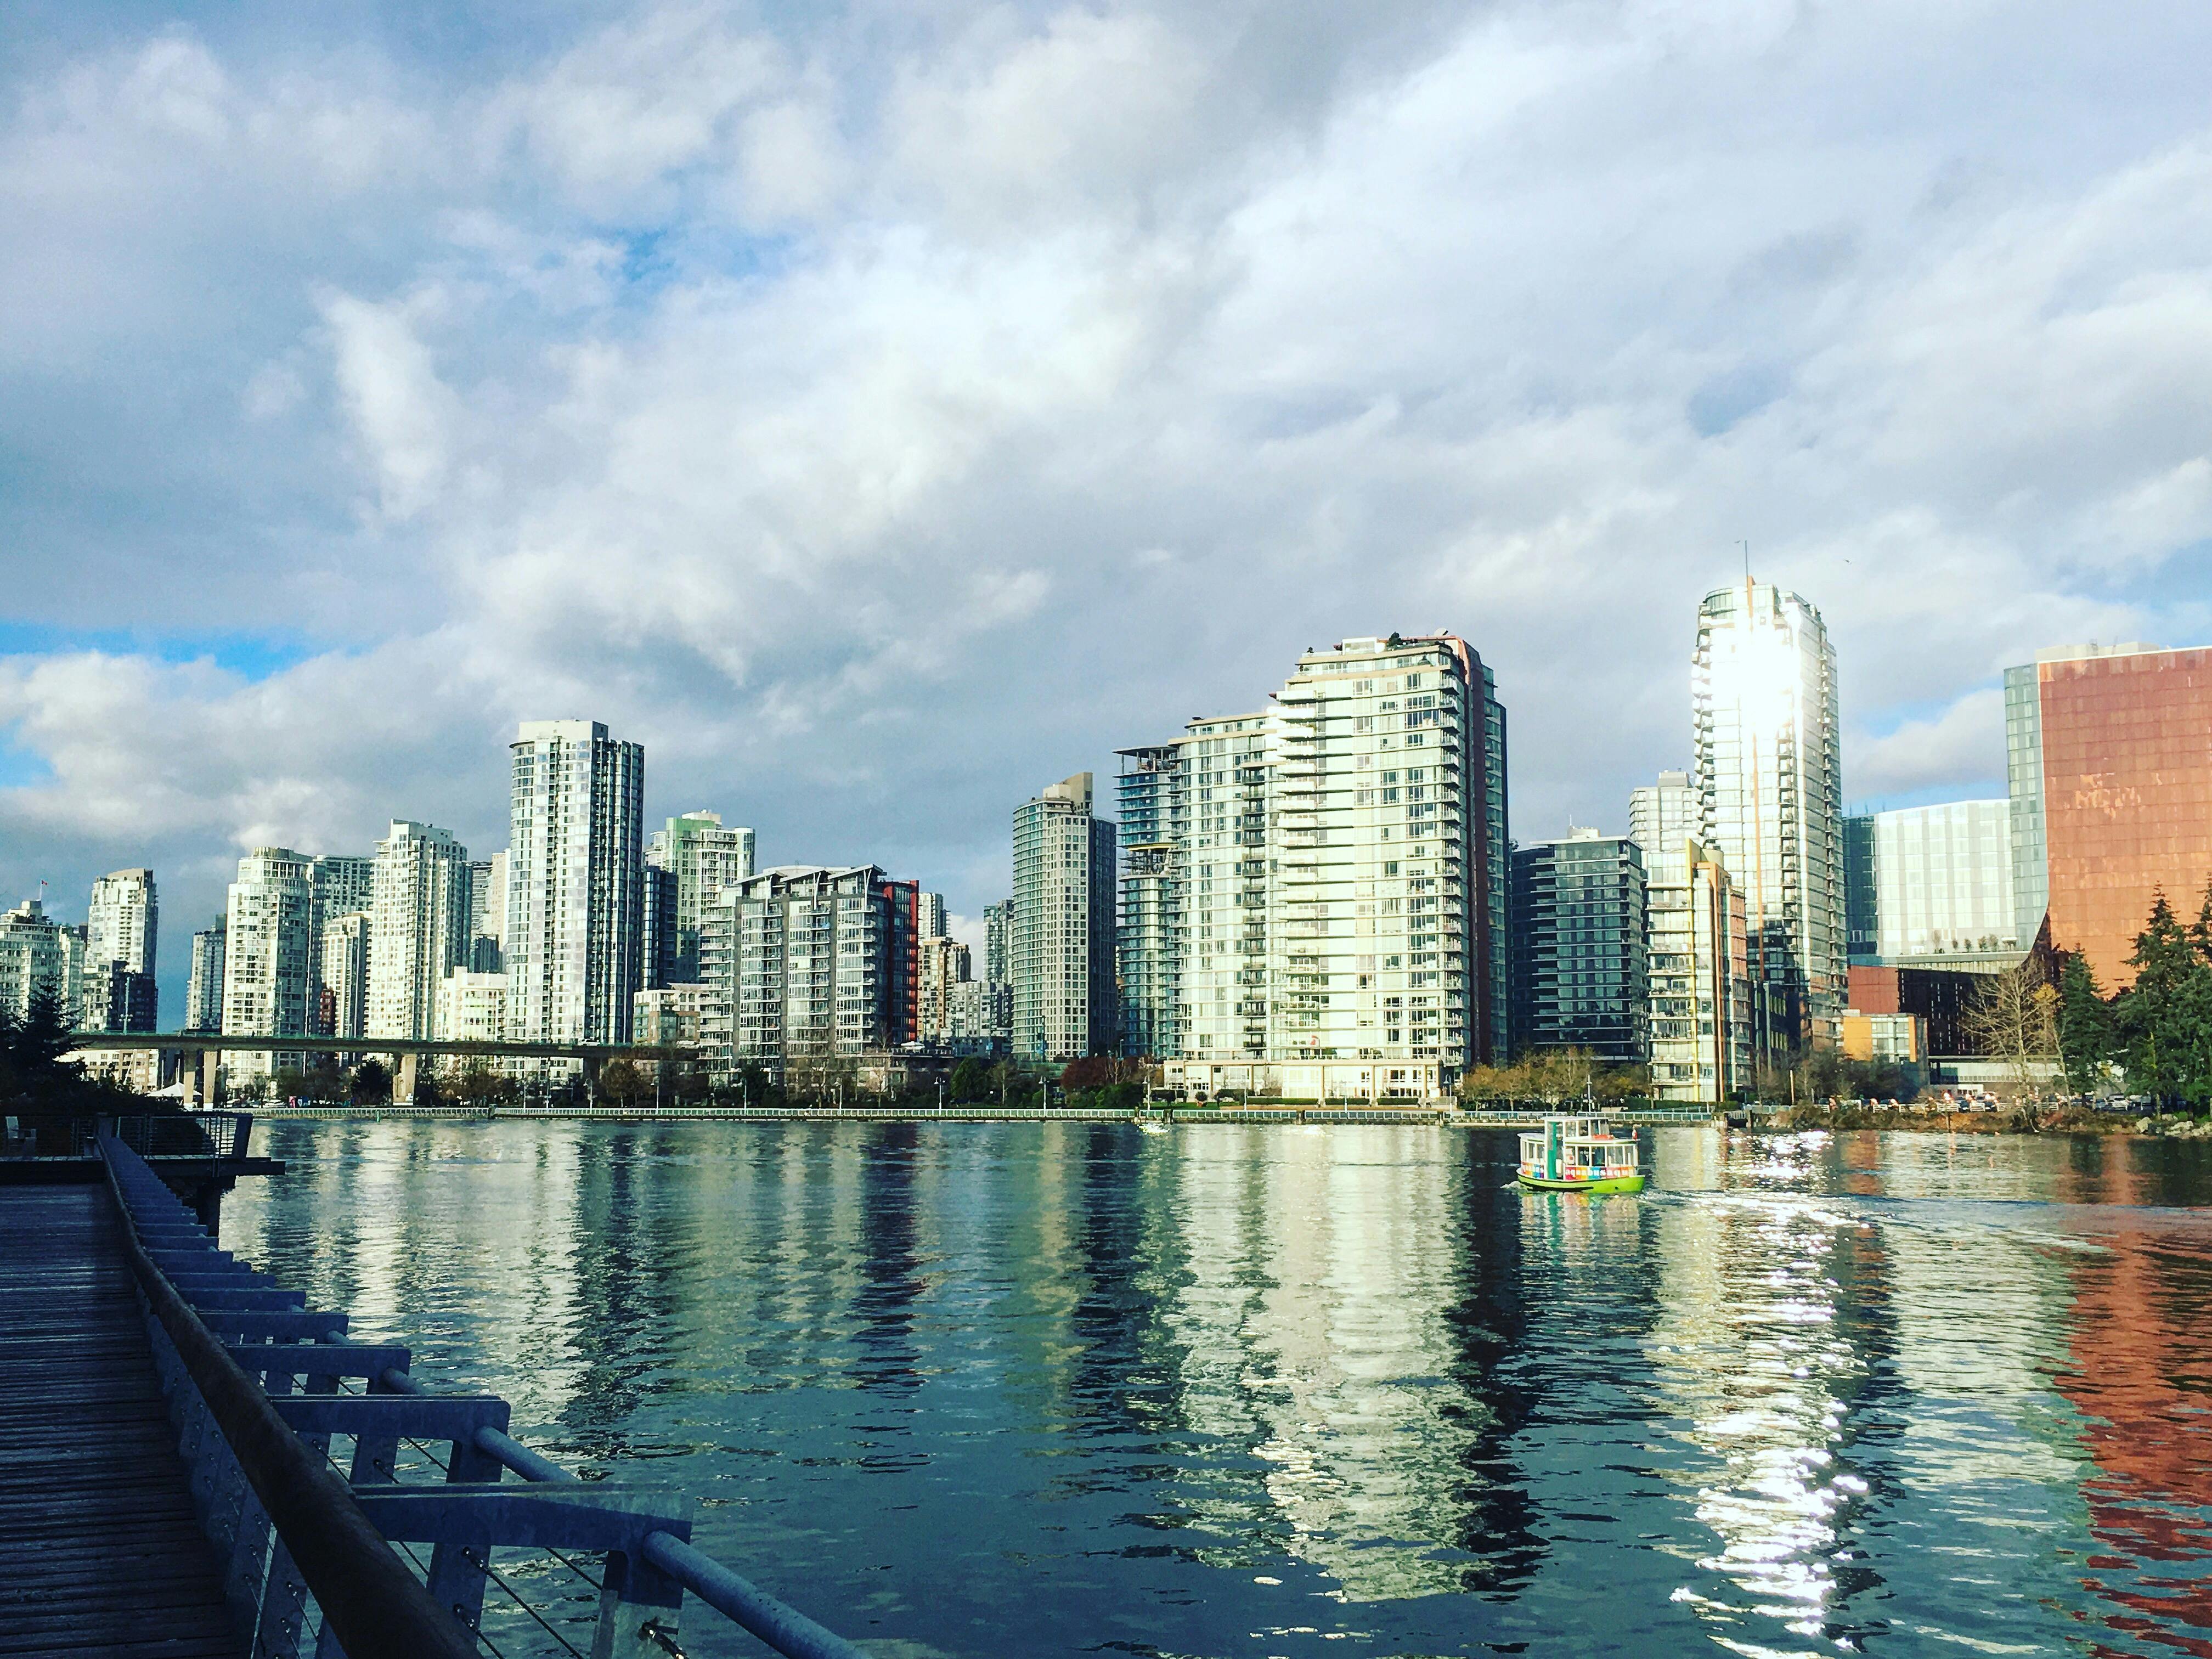 Sunny day in Olympic Village during a 2018 winter king tide. The water levels are very high and there isn't a lot of freeboard along the coastline.